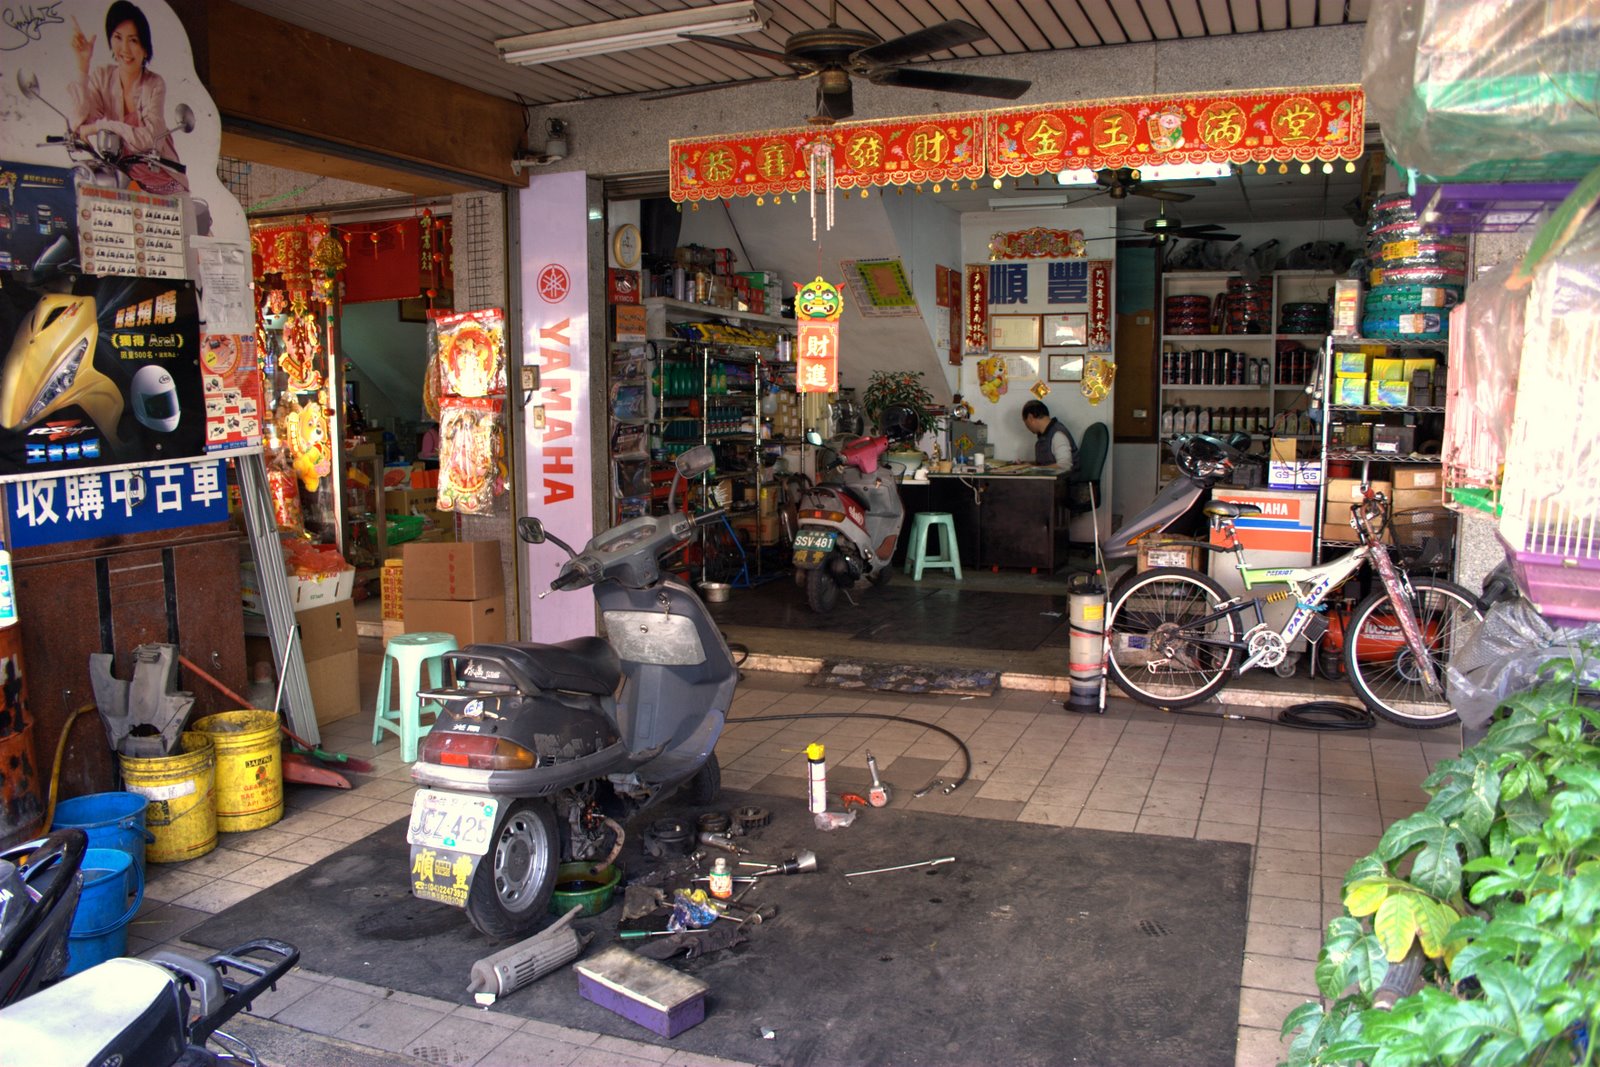 [Convenience+store+and+scooter+repair+shop+-+Taichung+Taiwan.jpg]